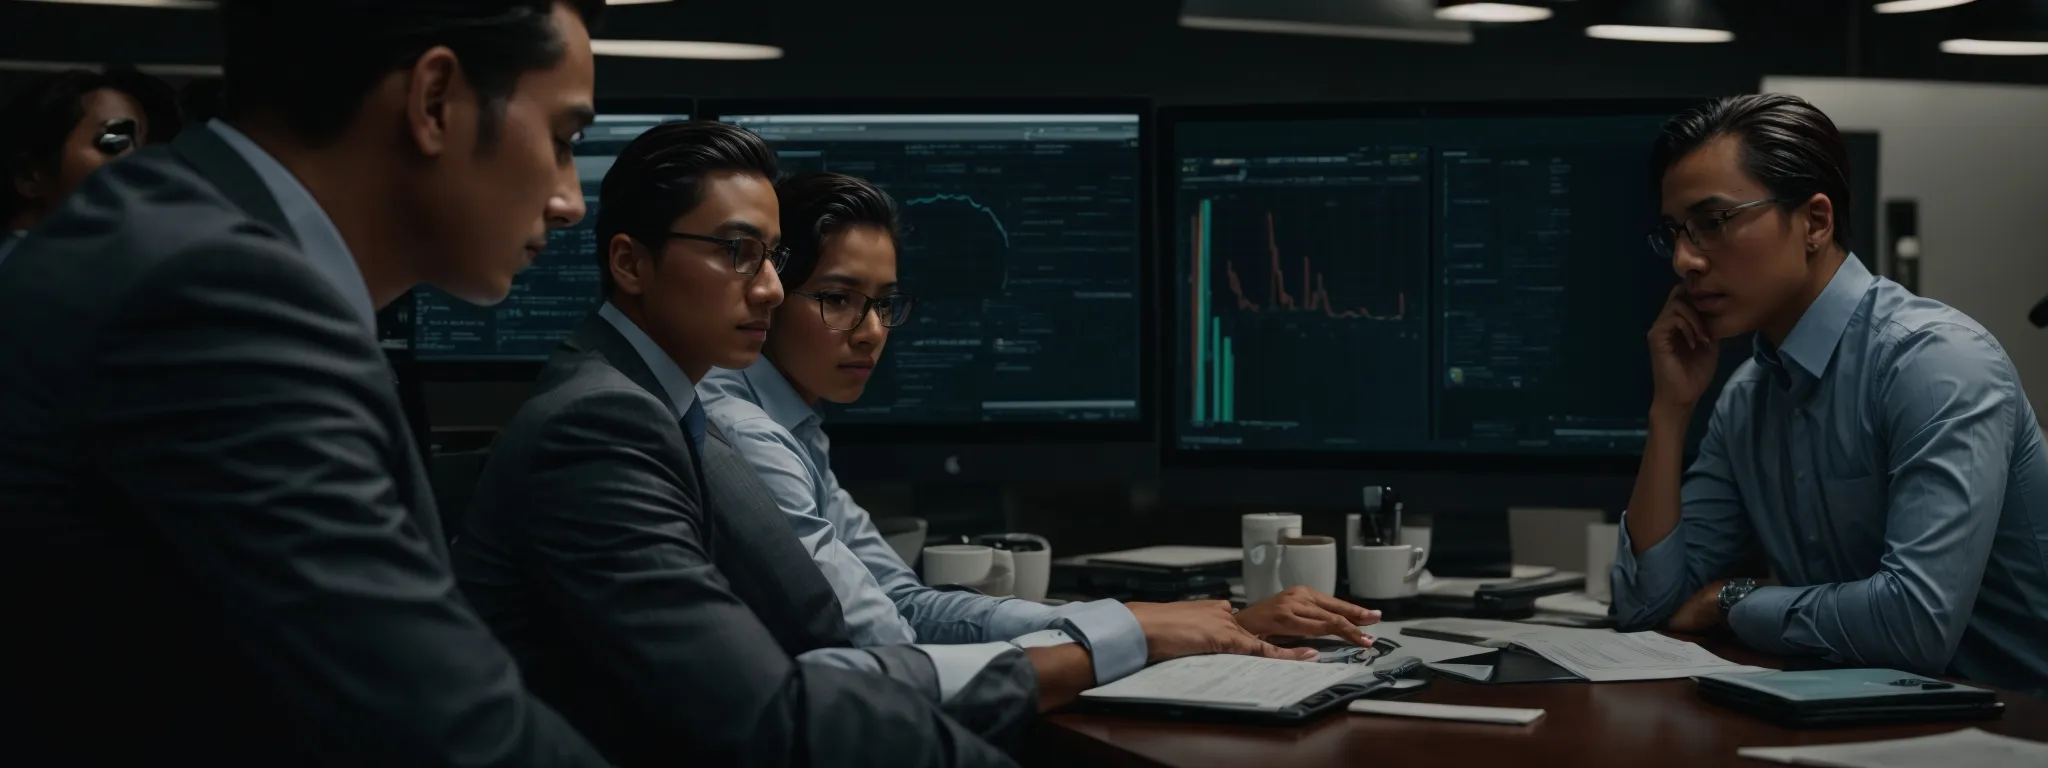 a business team attentively examining analytics on a computer screen.